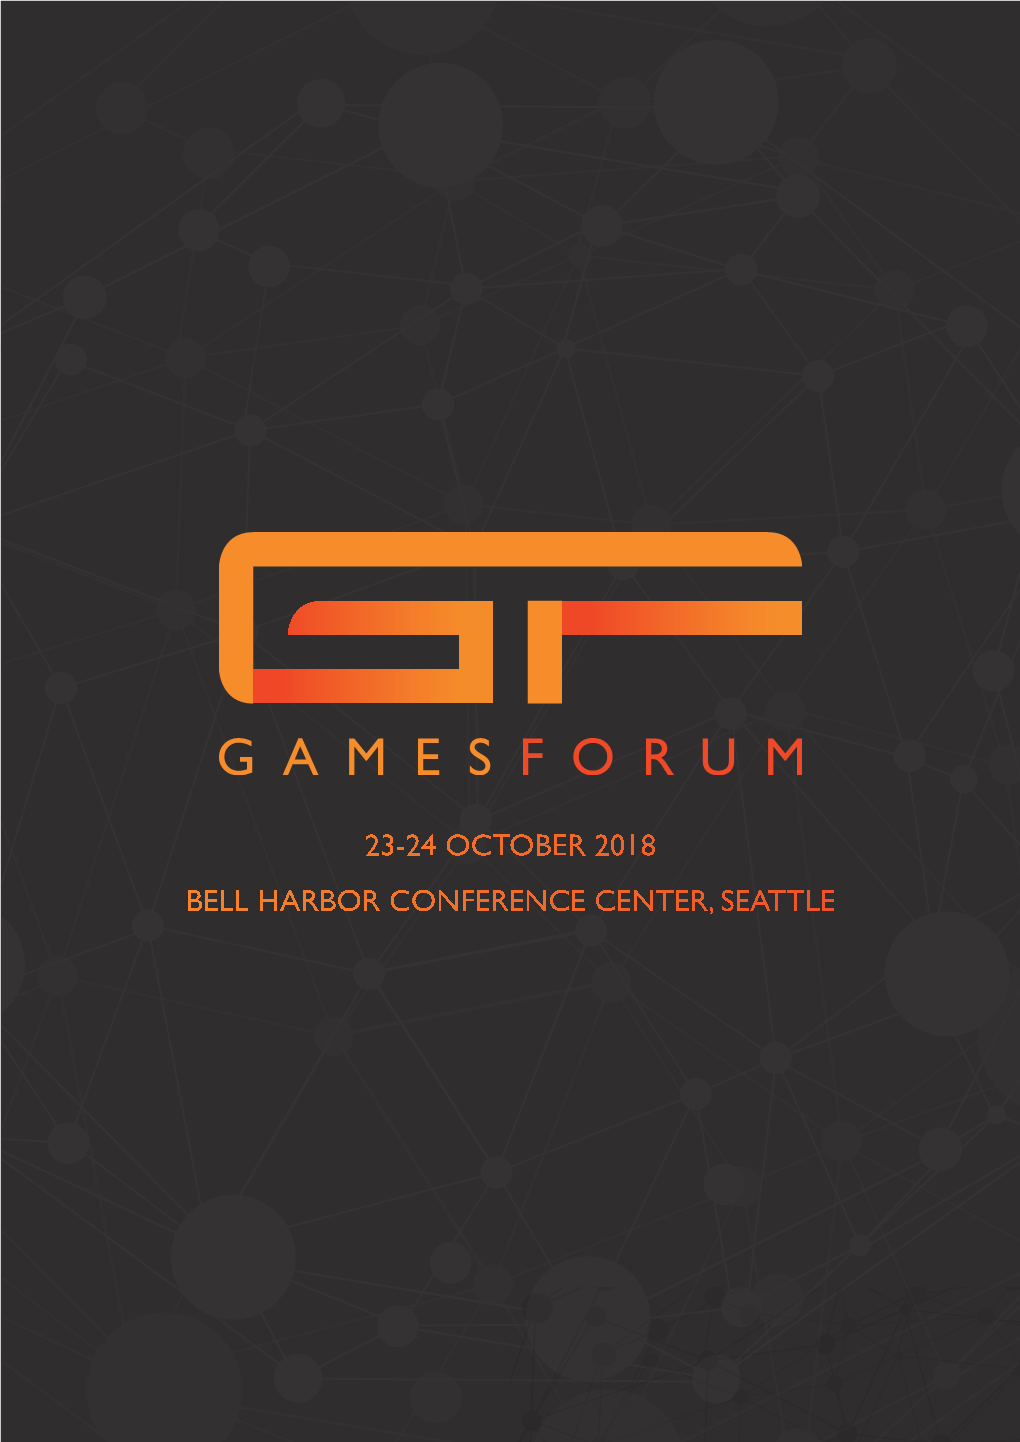 23-24 October 2018 Bell Harbor Conference Center, Seattle What Is Gamesforum? About Gamesforum Seattle